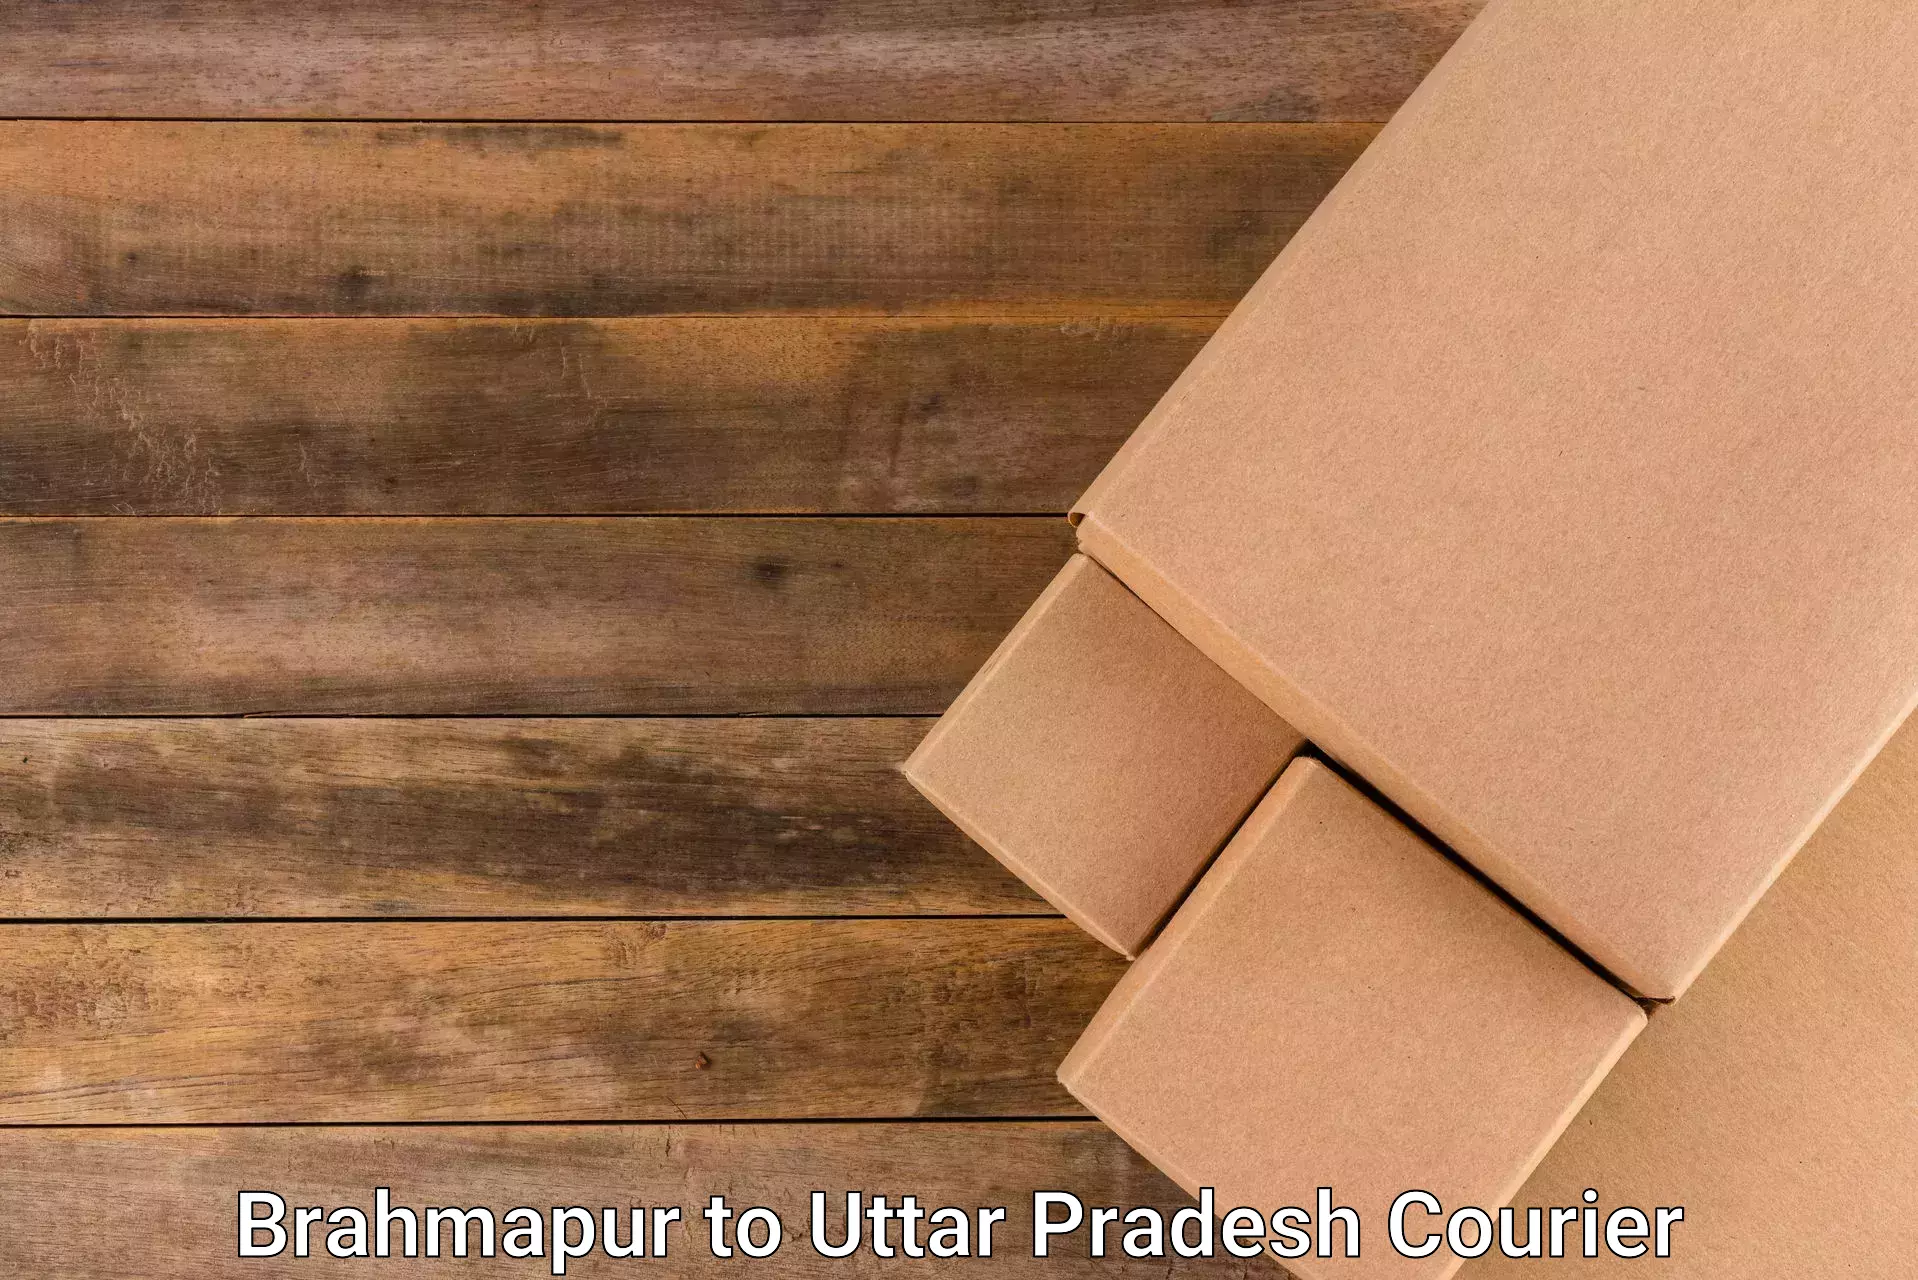 High-quality delivery services in Brahmapur to Badlapur